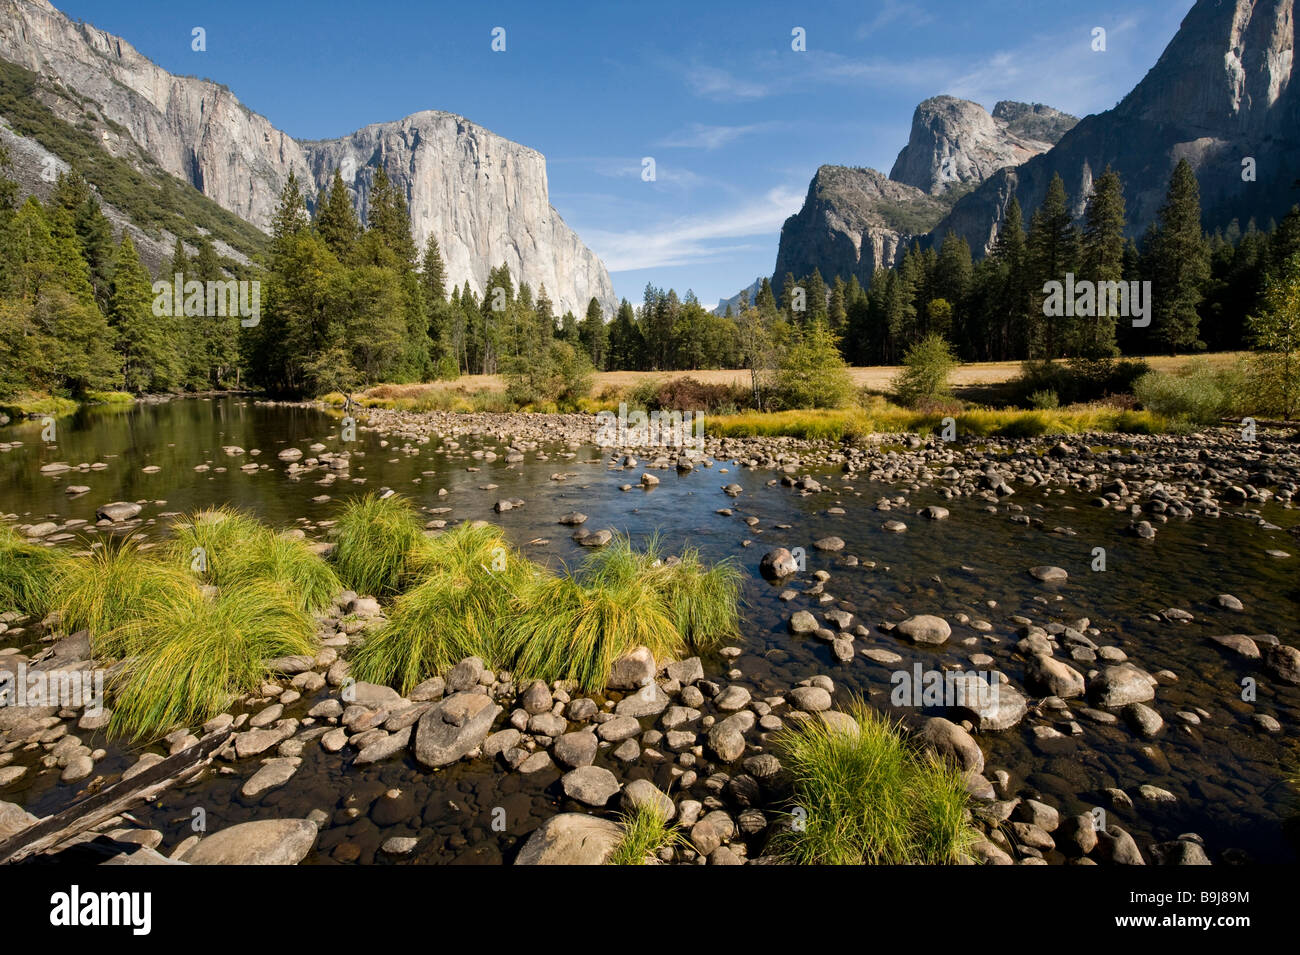 Merced river and Yosemite Valley seen from Gates of the Valley, Yosemite Nationlpar, California, USA Stock Photo